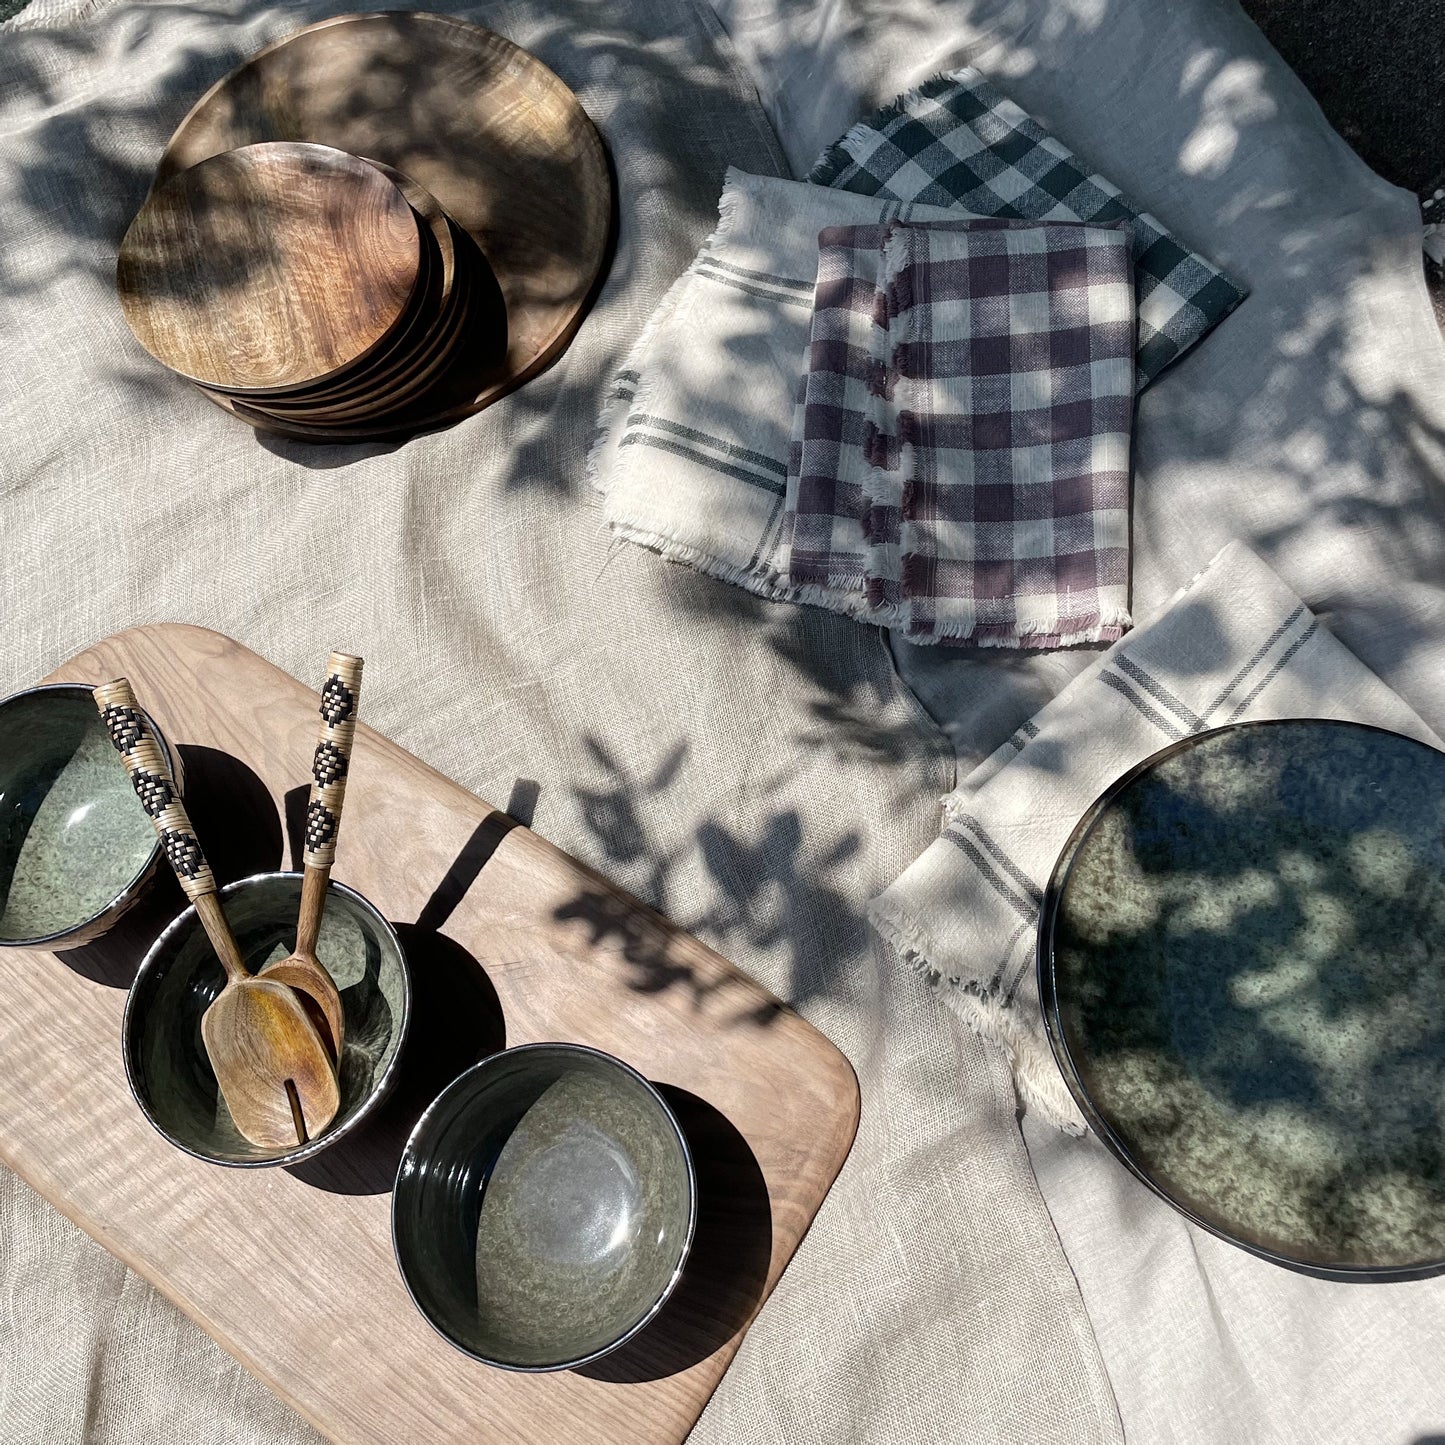 picnic set up with dark green and black plate and bowls, along with wooden plates and boards and checked tea towels